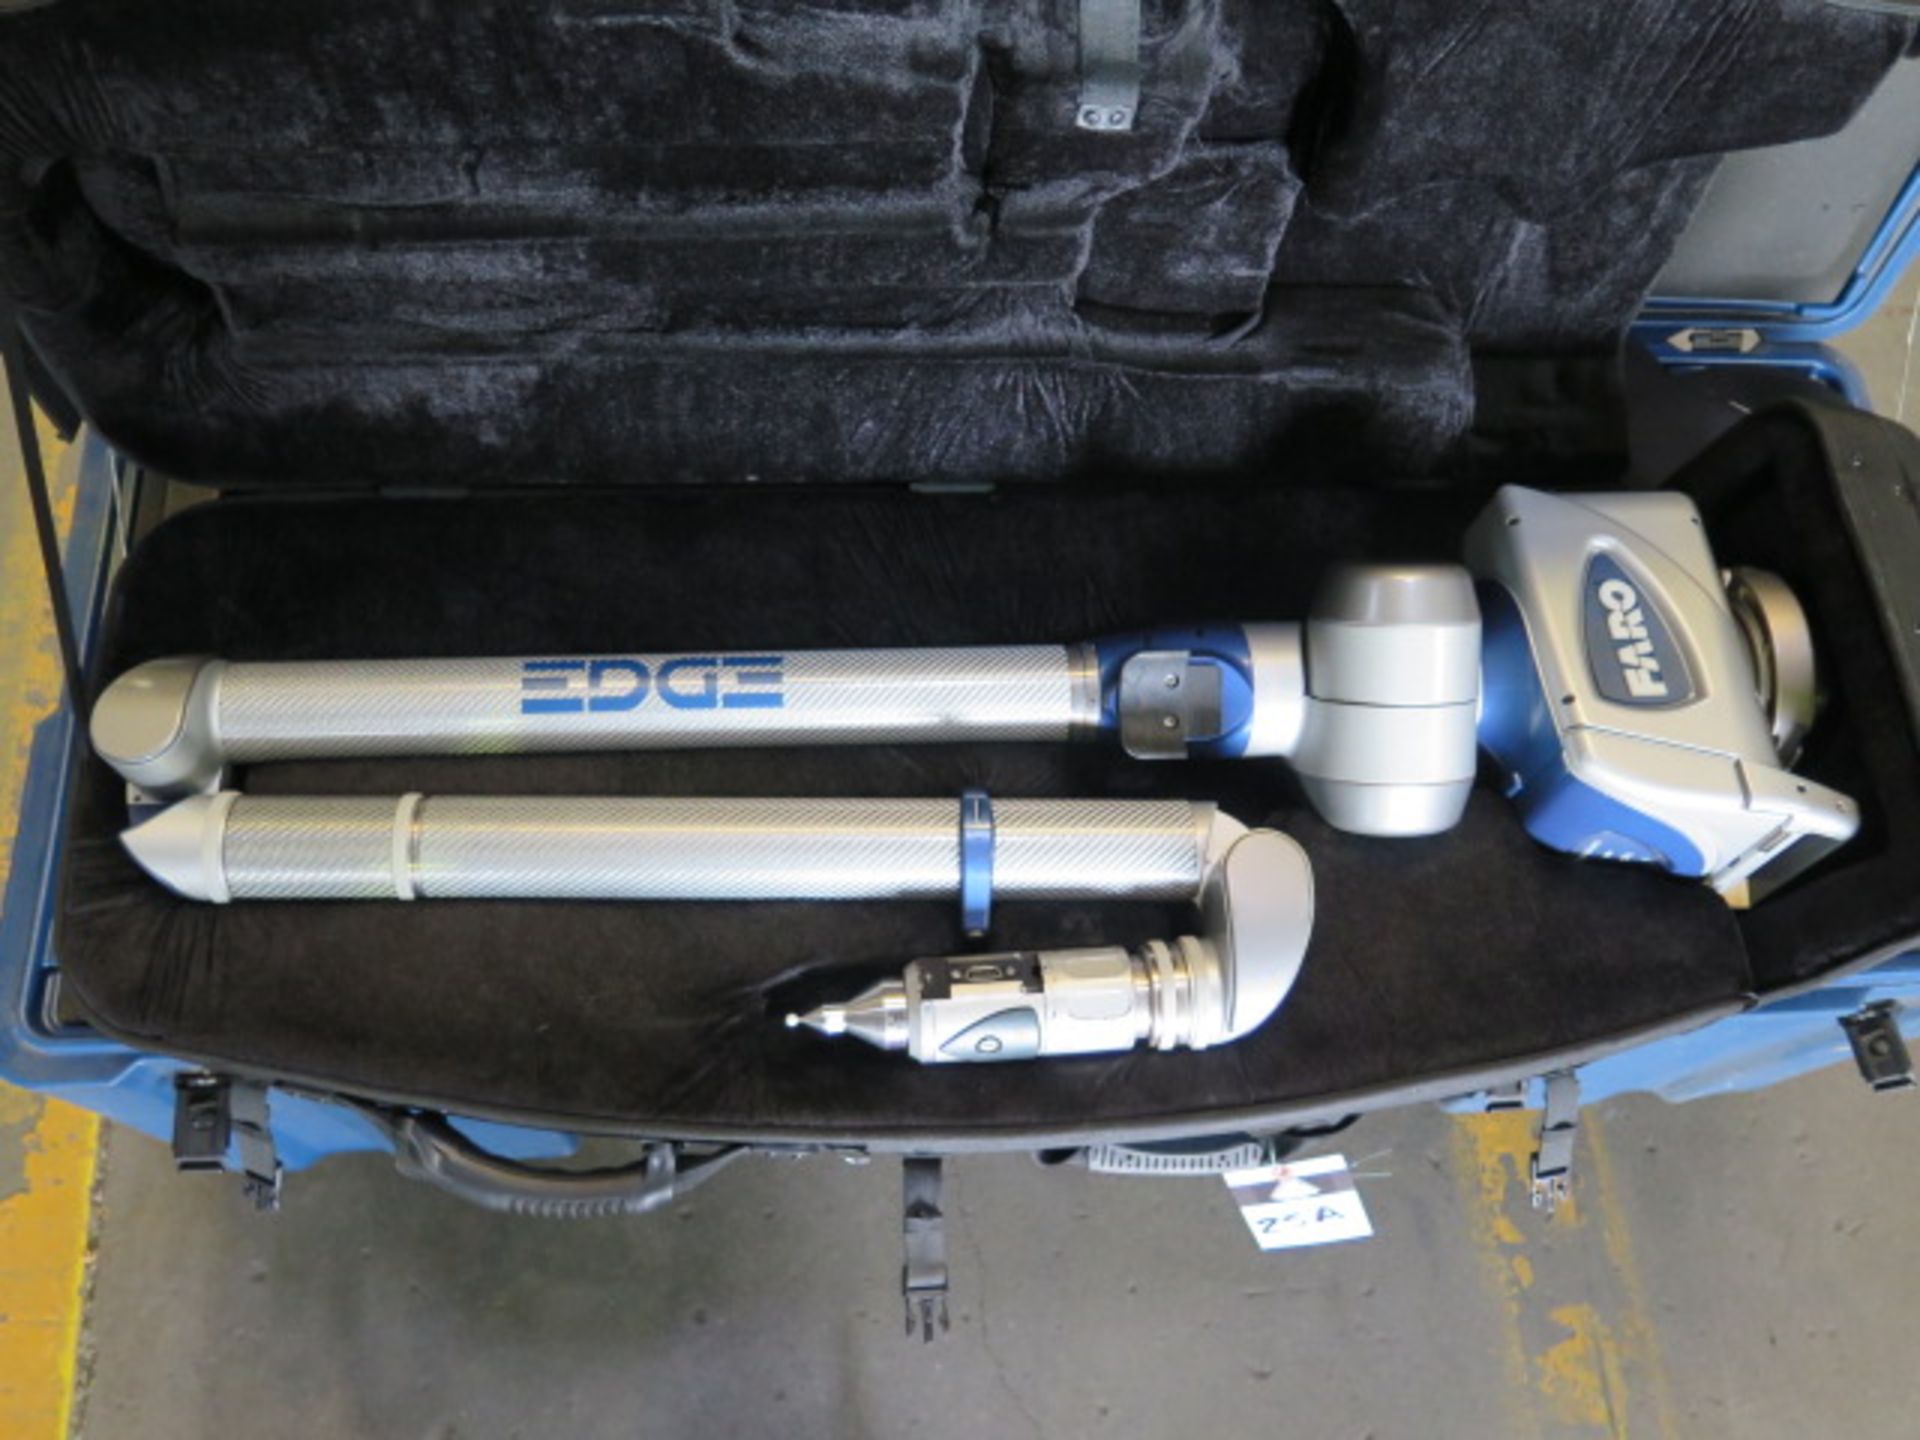 2011 Faro "EDGE" CMM Arm s/n E09-05-11-09320 w/ Hand Attachment, Tip Accessories, Computer and Trave - Image 2 of 18